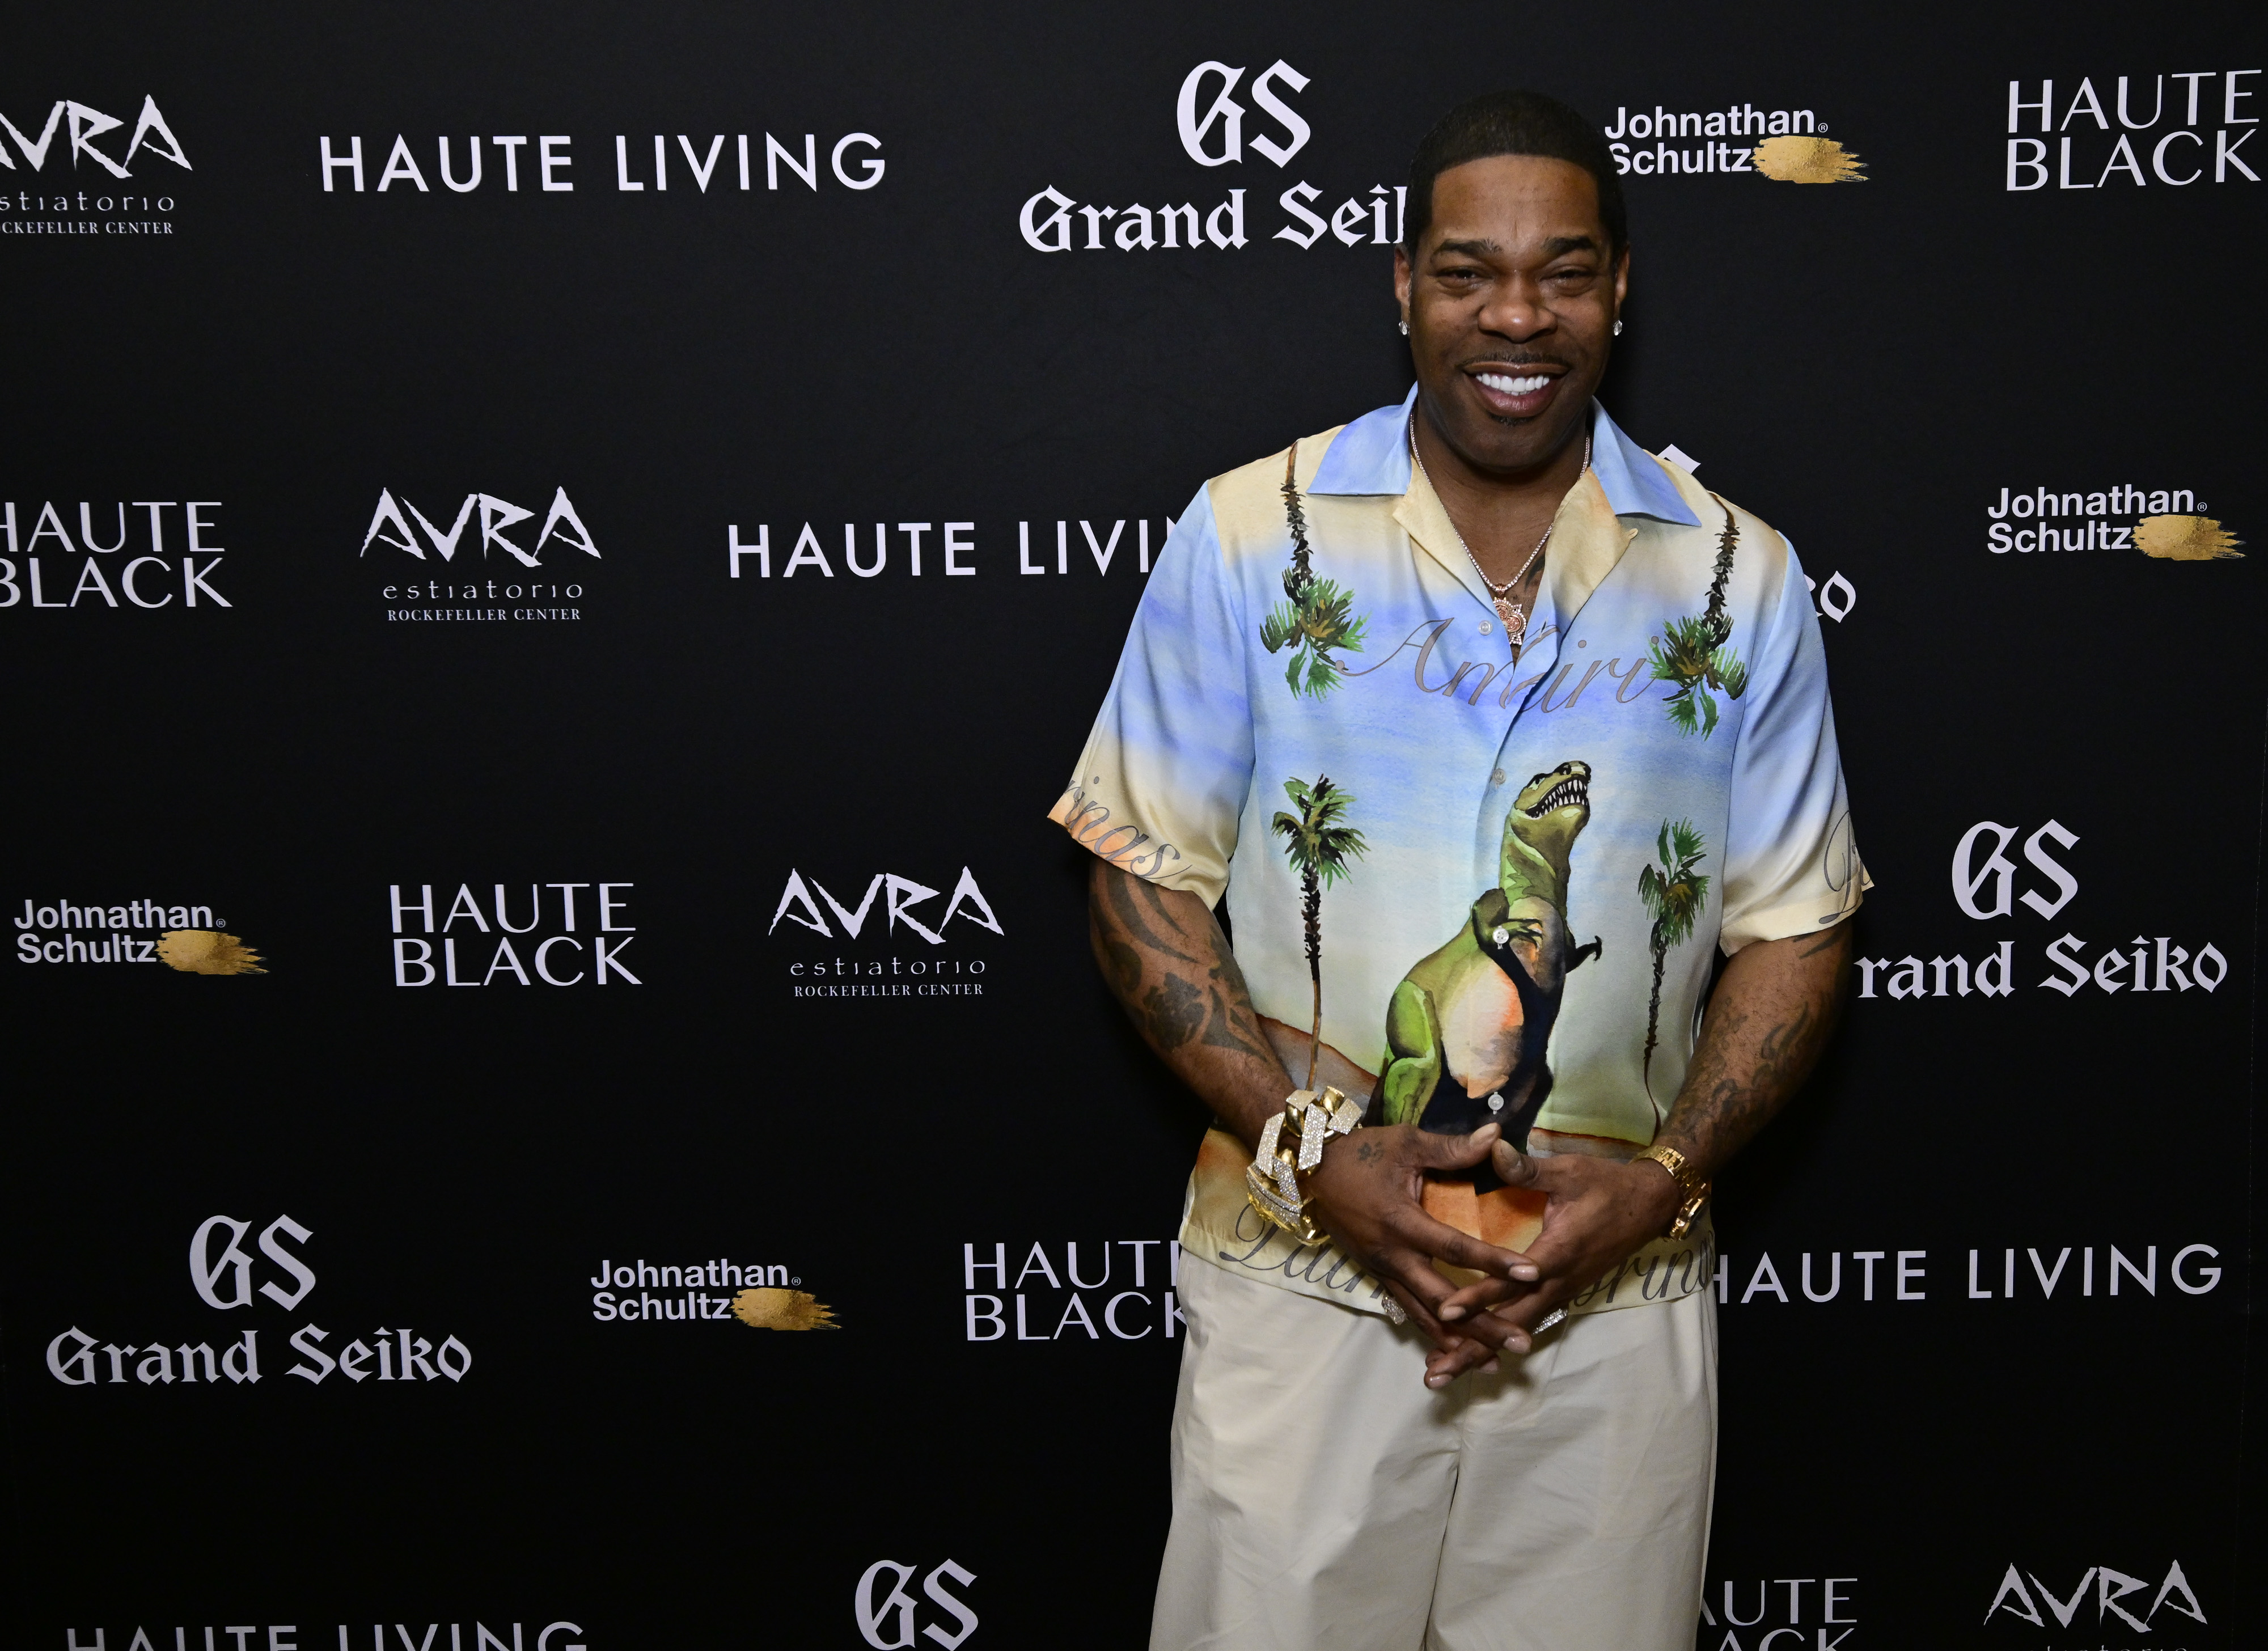 Busta Rhymes smiles on the red carpet, wearing a printed short-sleeved shirt with palm trees and white pants, against a Haute Living backdrop